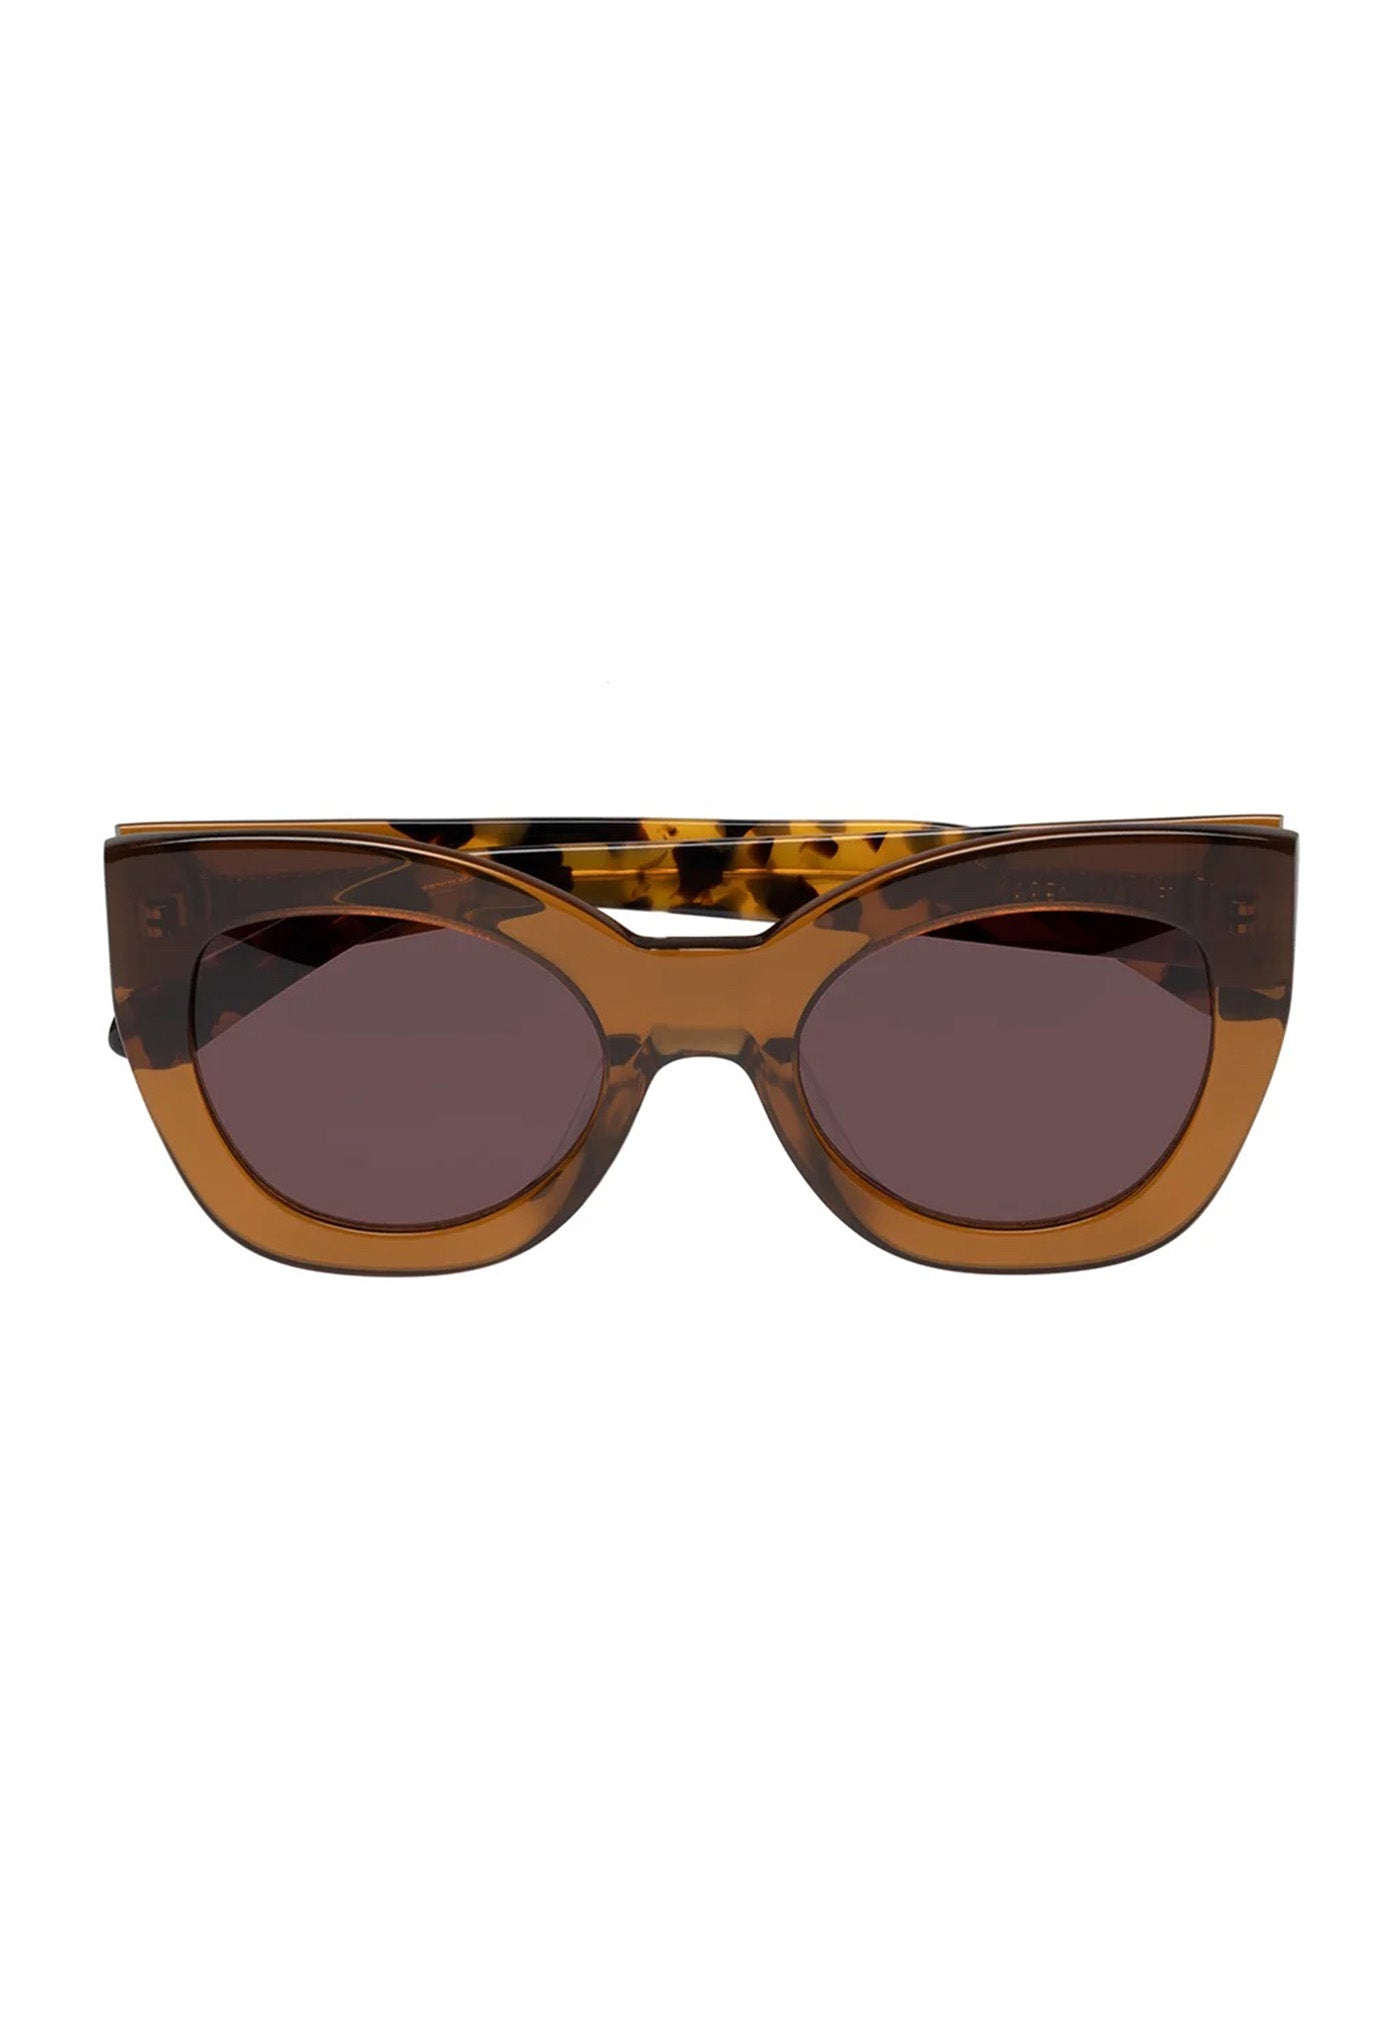 Northern Lights Sunglasses - Tan Crazy Tort sold by Angel Divine